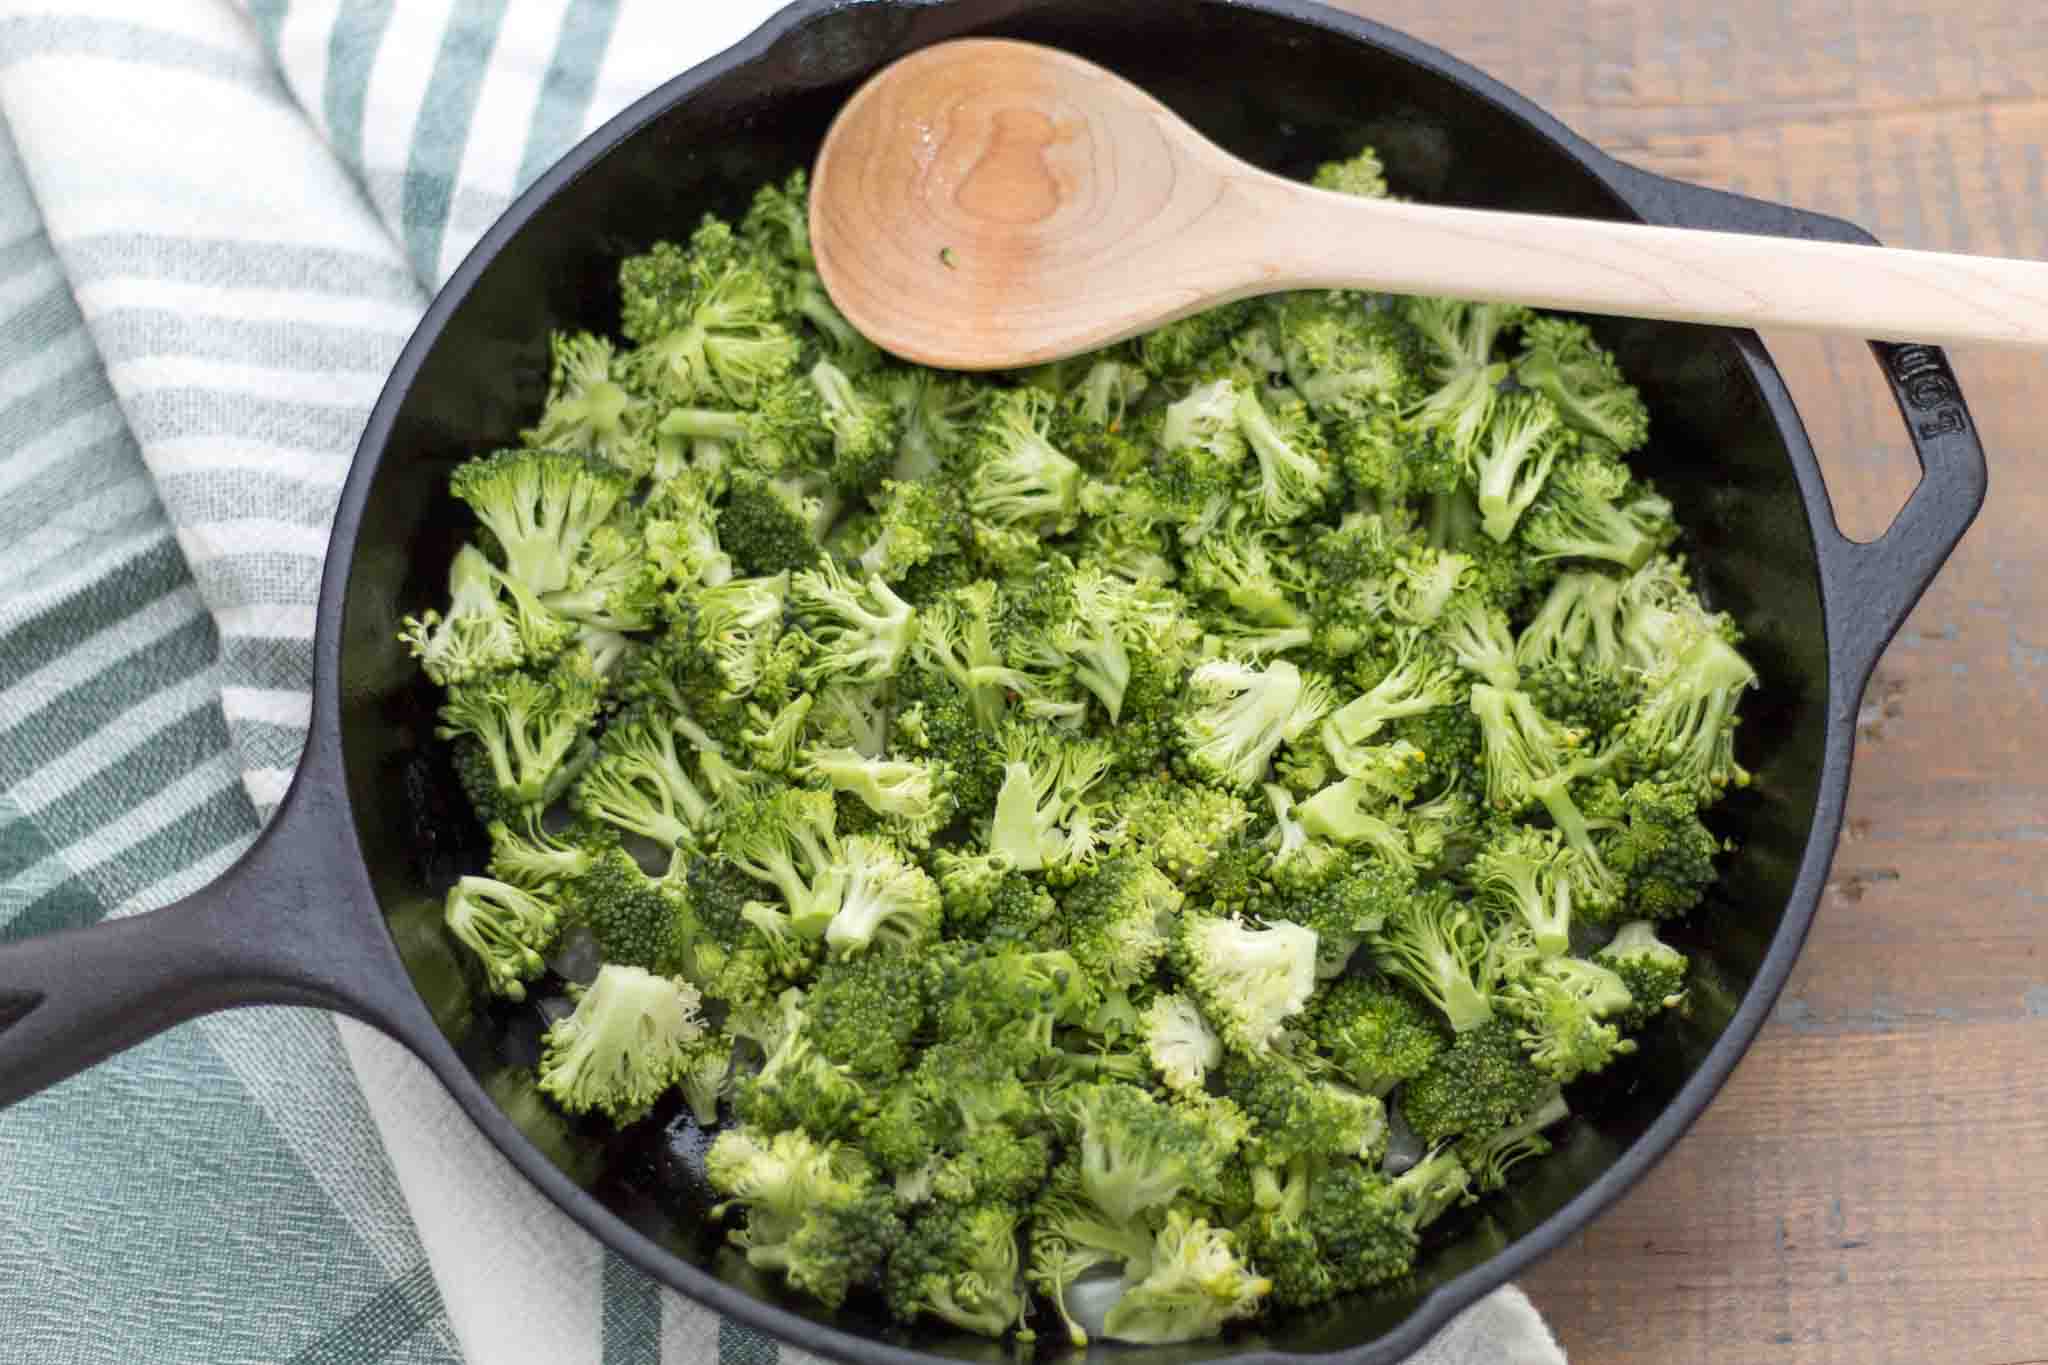 chopped broccoli florets in a cast iron skillet with a maple wood spoon